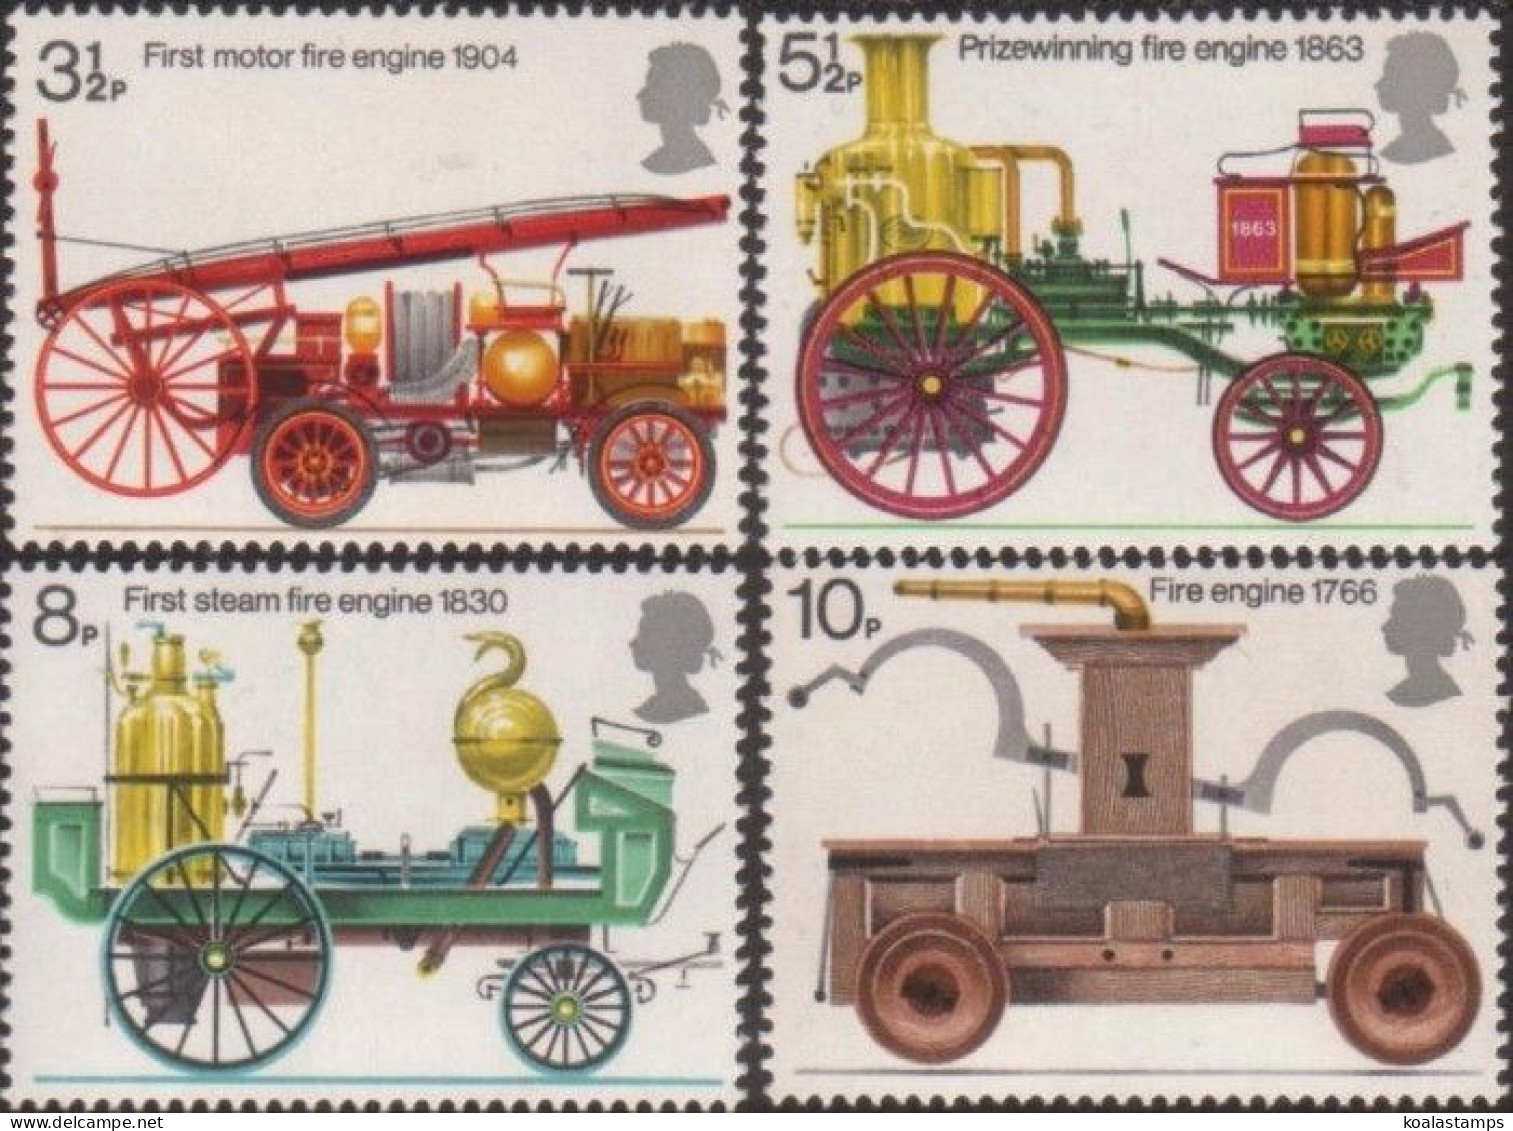 Great Britain 1974 SG950-953 QEII Fire-engines Set MNH - Unclassified